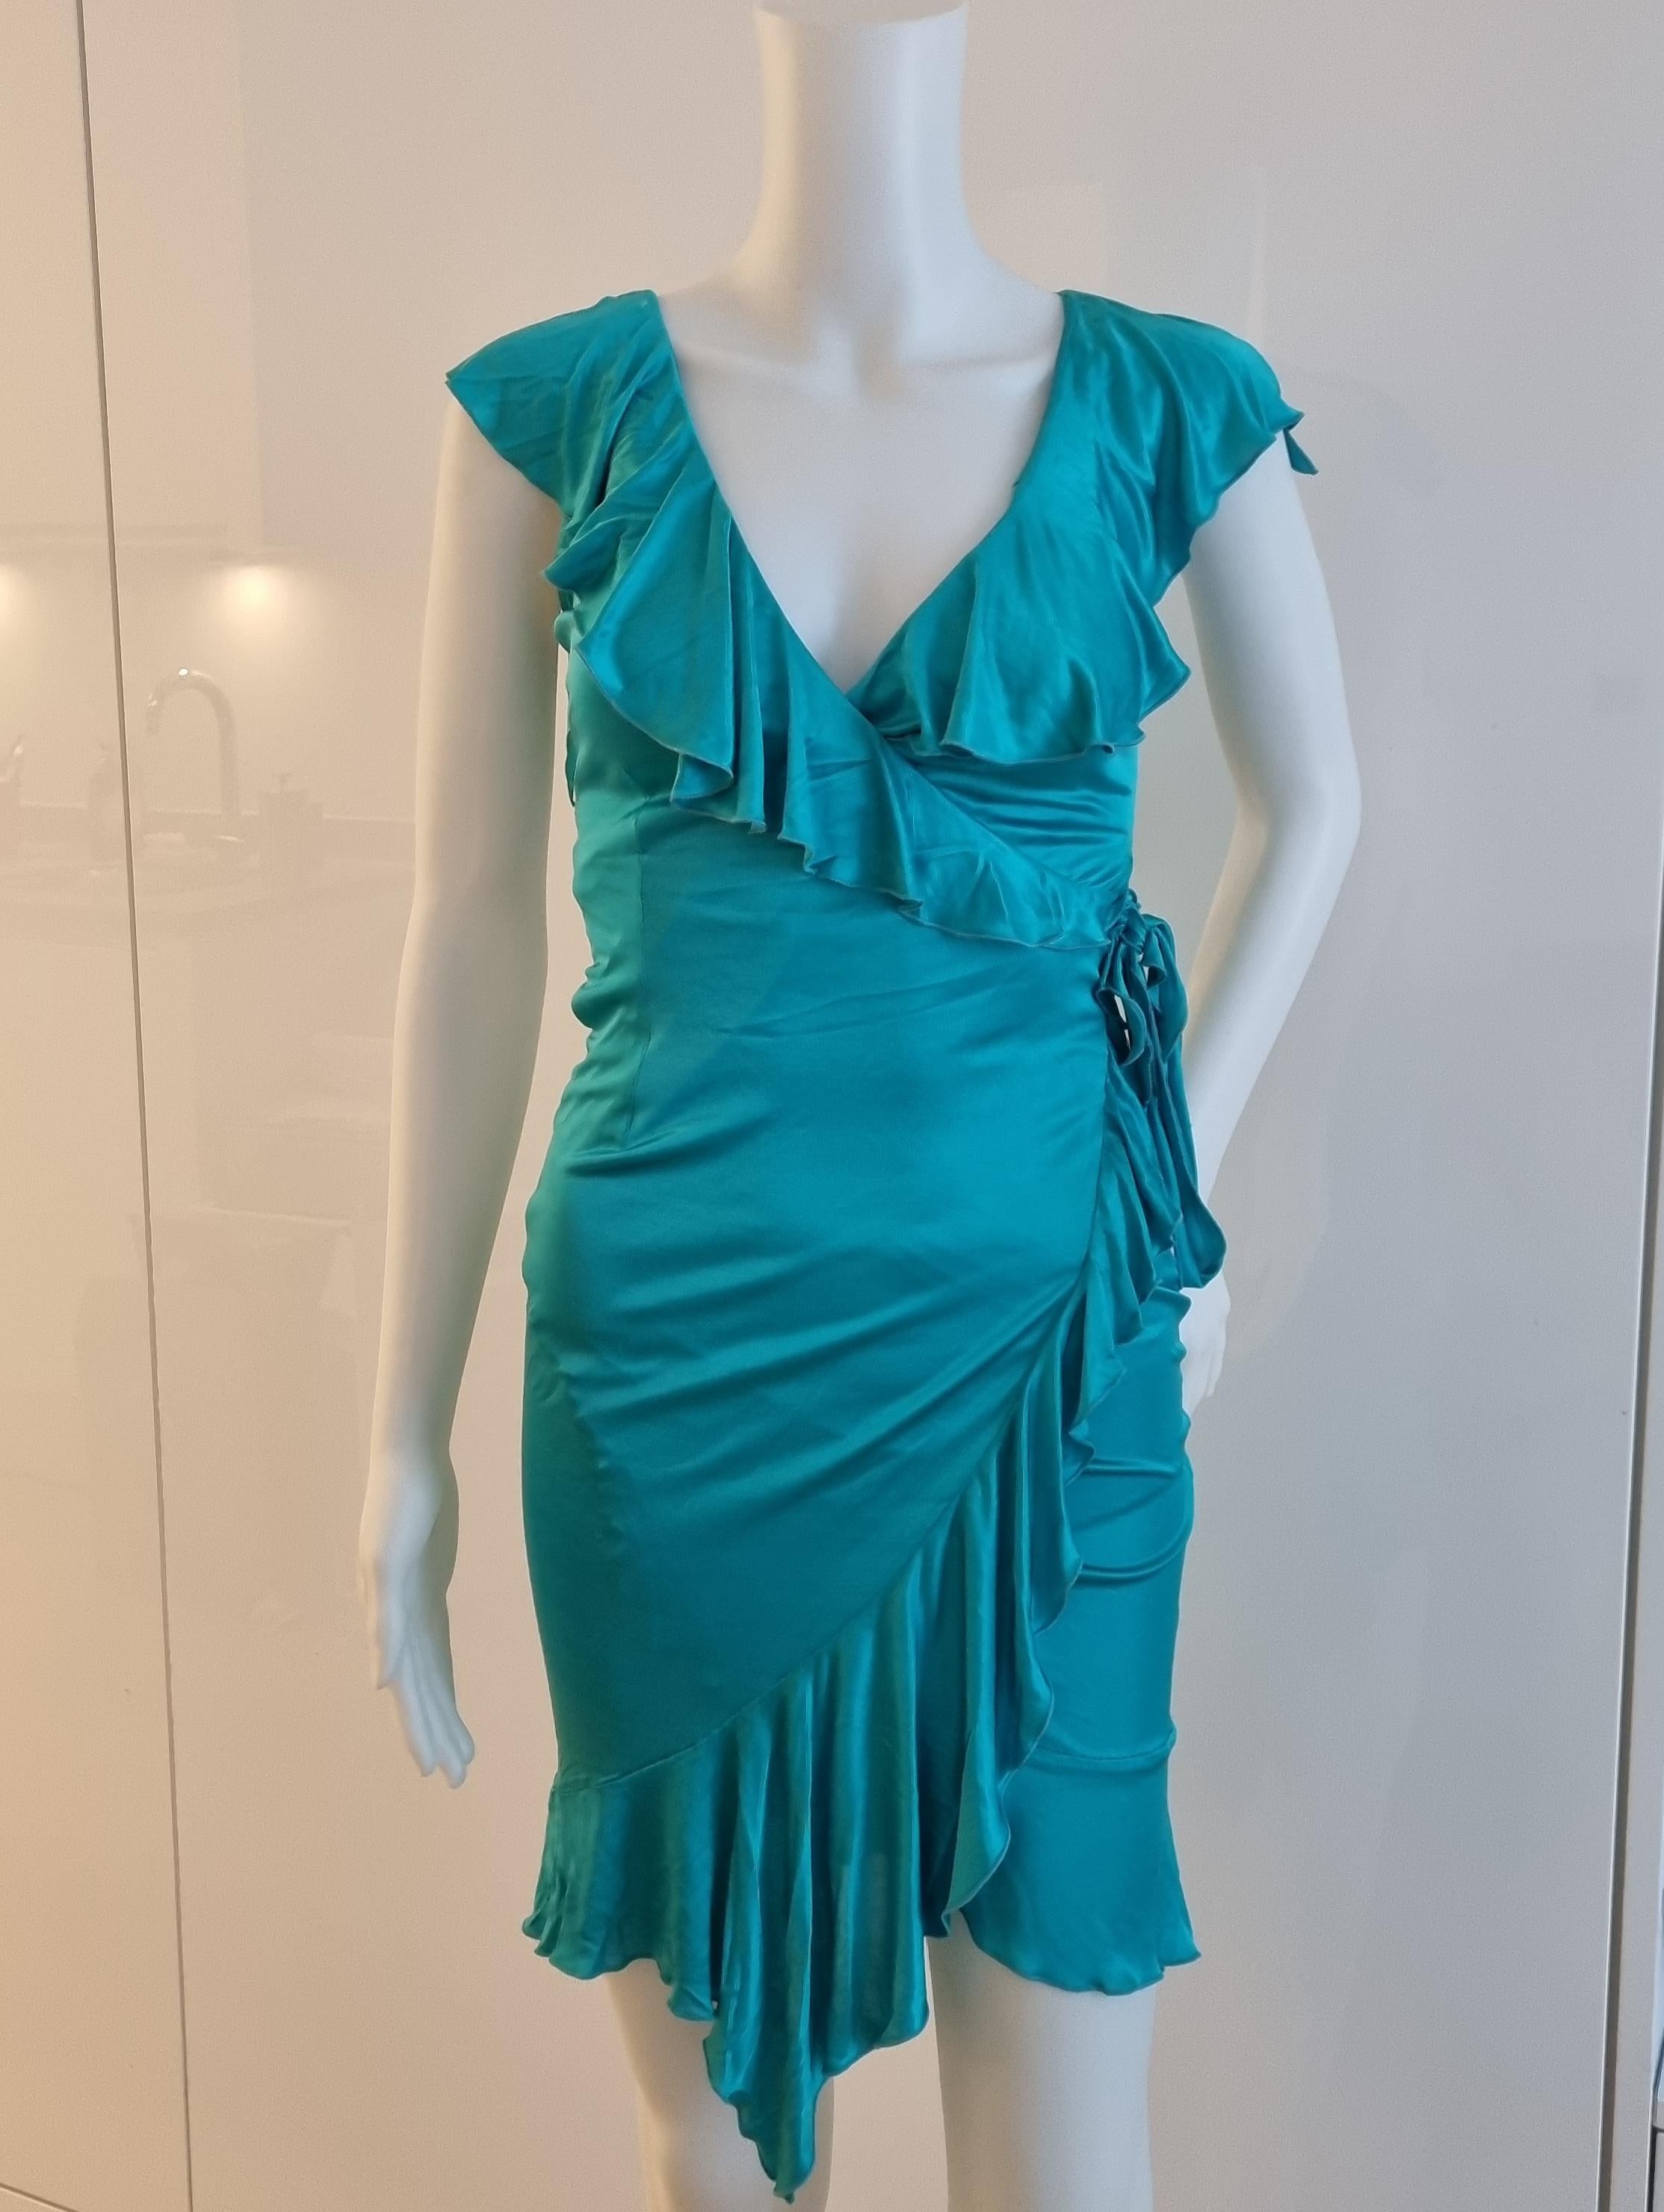 My Runway Archive presents this Iconic turquoise ruffled runway dress from the Versace SS 2004 collection. Also featured in the ad campaign. Madonna also wore this dress to the Grammys in pink. 
Material: Viscose
Size: Italian size 38 equivalent of